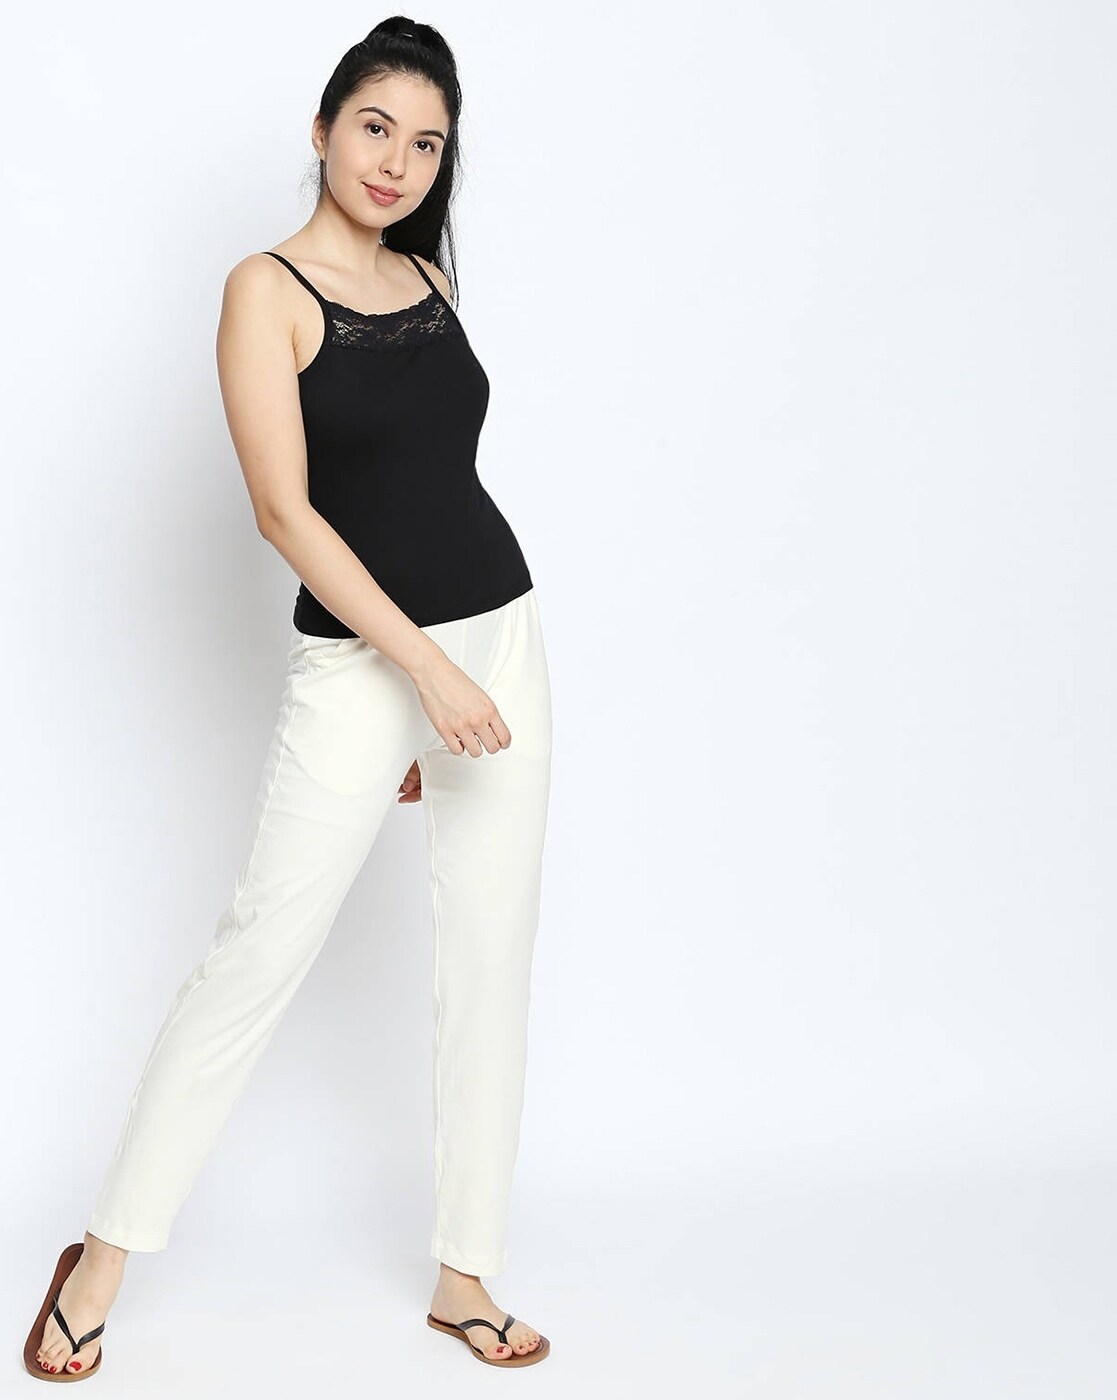 Shyla by fbb Women Camisole - Buy Shyla by fbb Women Camisole Online at  Best Prices in India